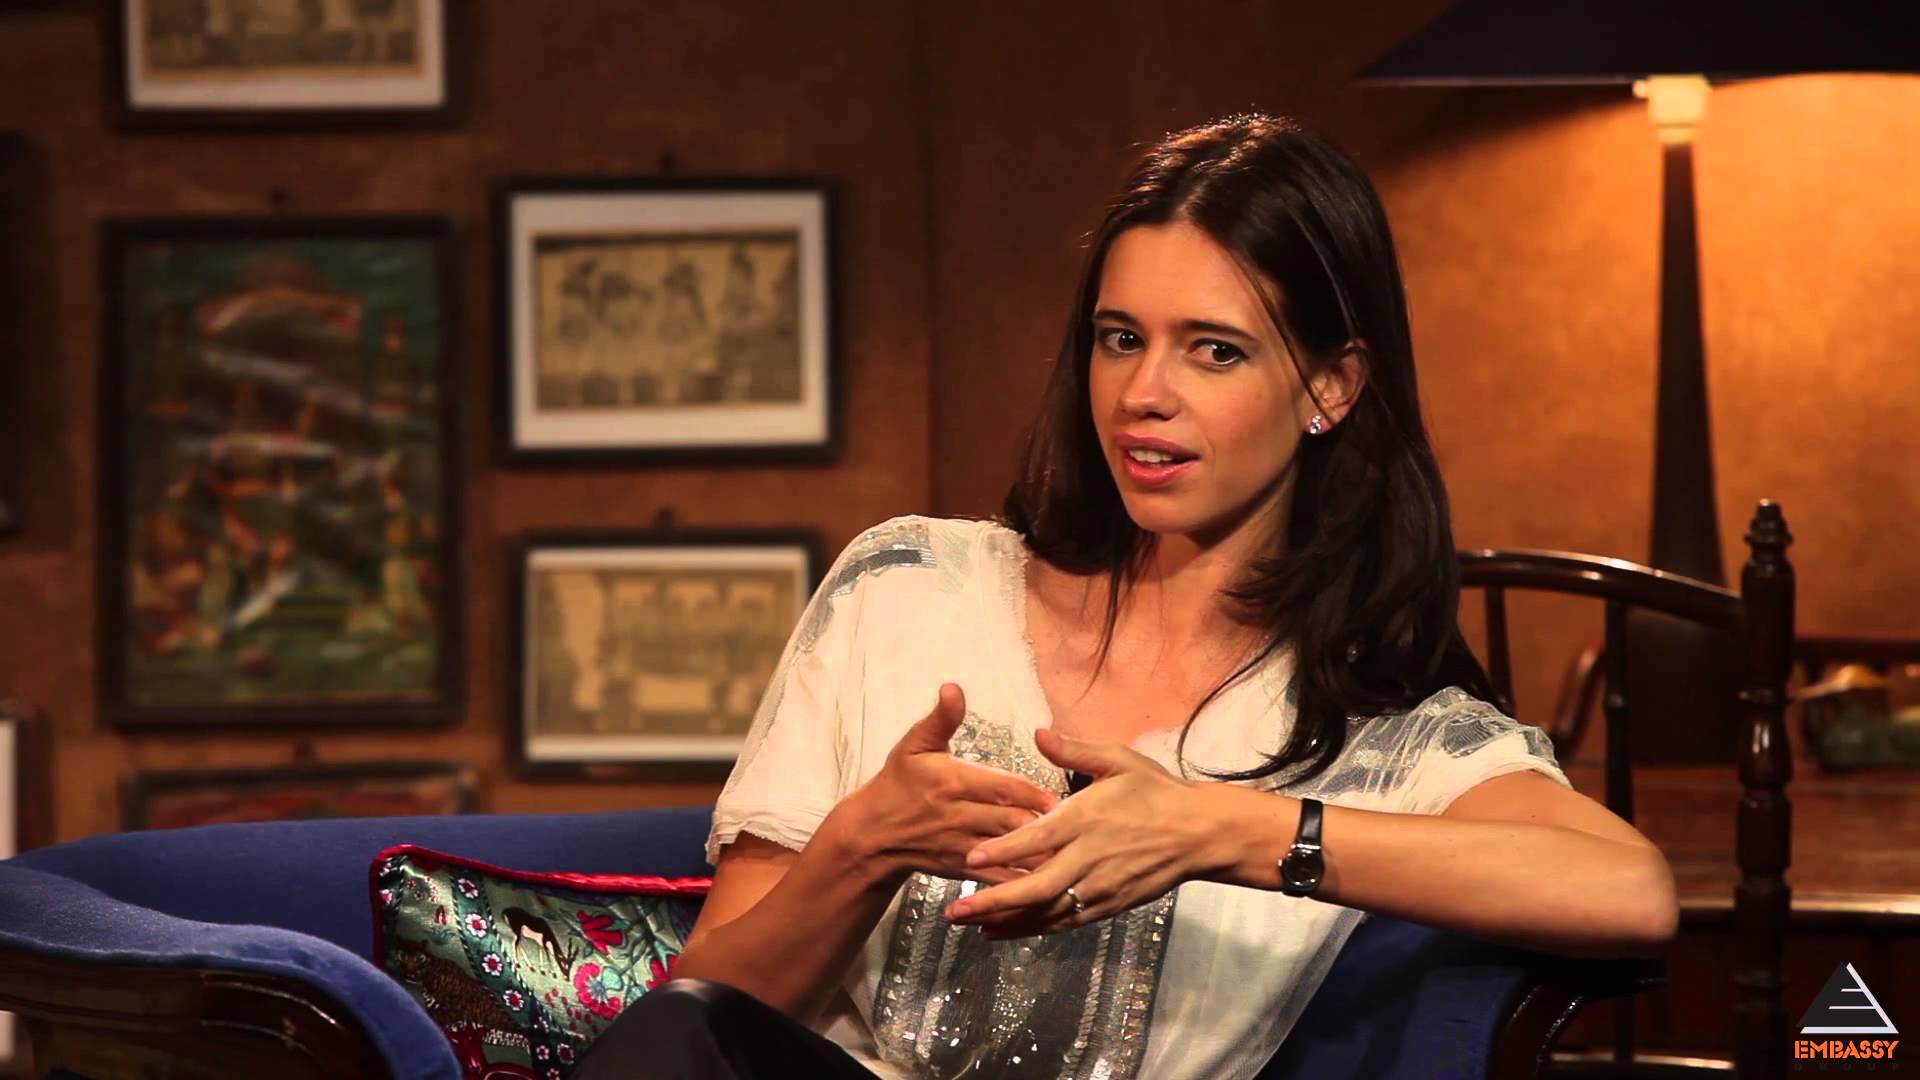 A Journo Asked Kalki If Her Hatred For Men Got Worse After Her Divorce Here is How She Shut Him Up